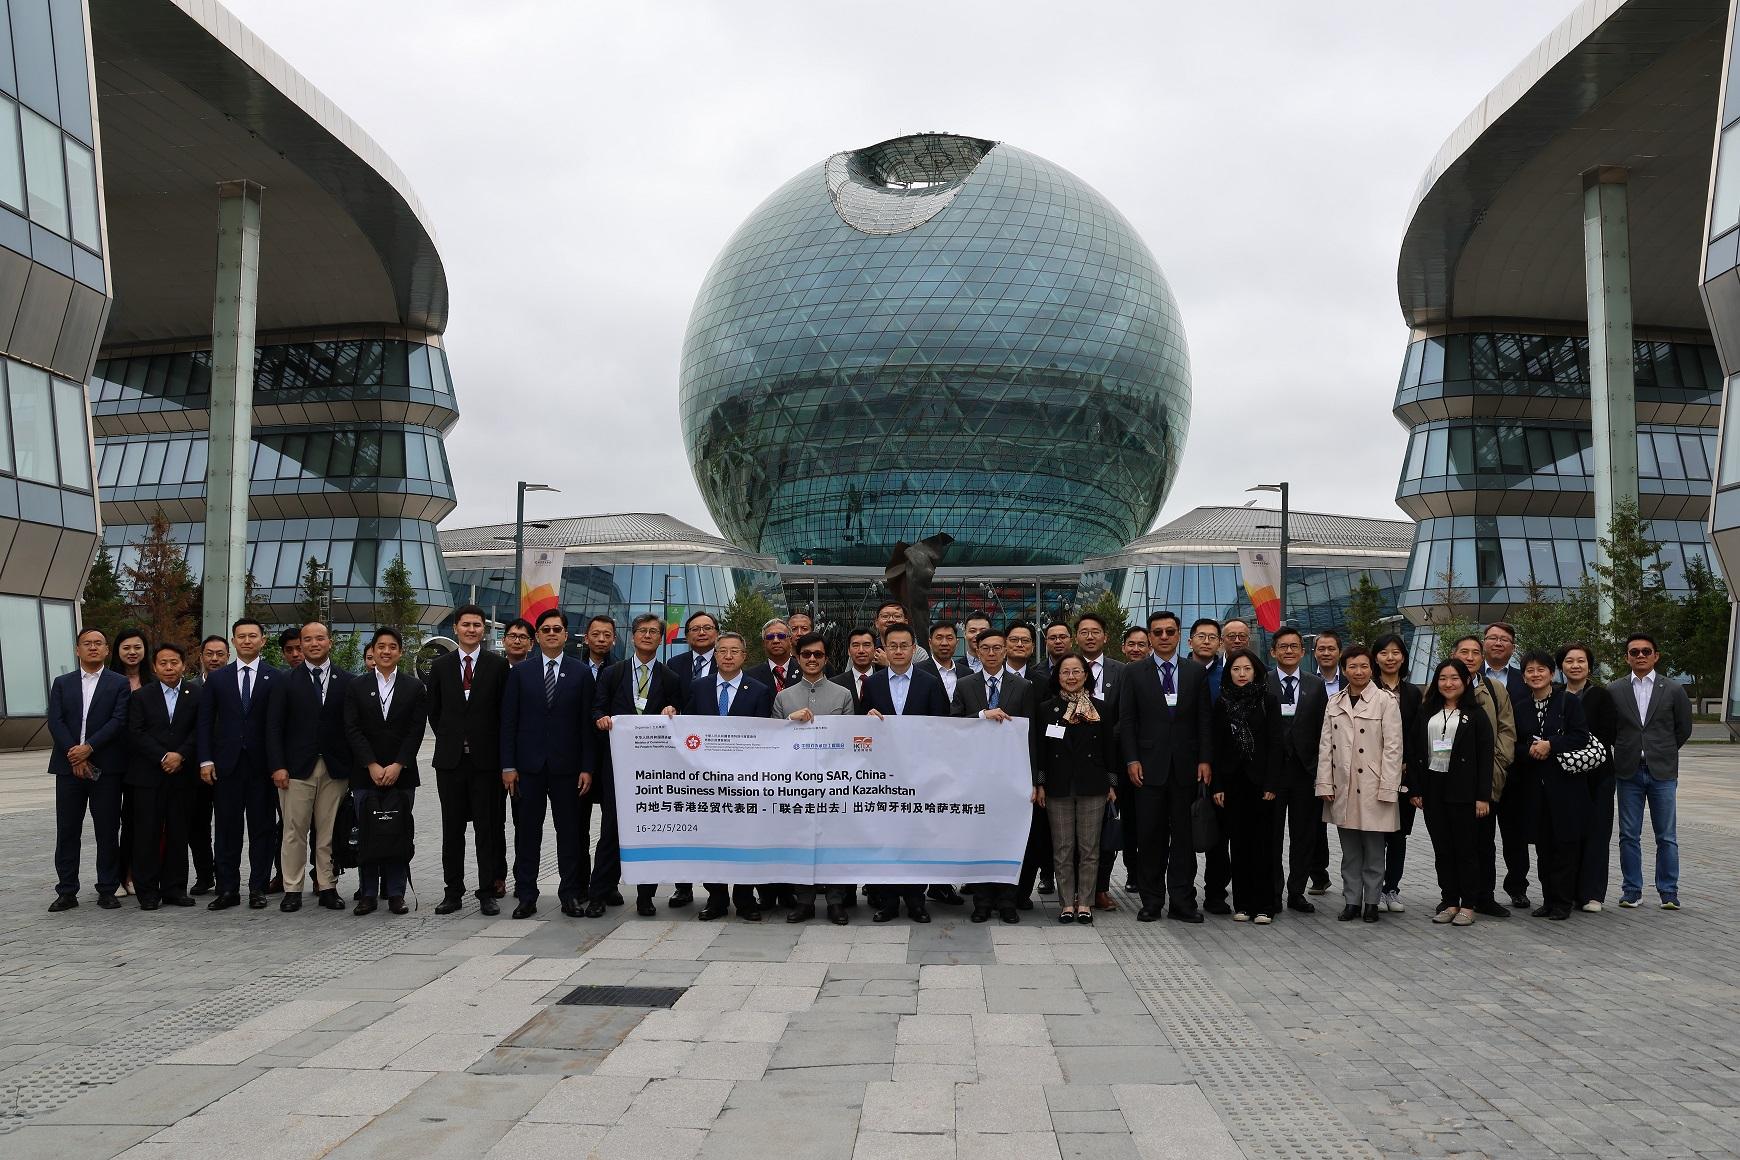 The Mainland-HKSAR joint business mission visited Hungary and Kazakhstan from May 16 to 22. Photo shows the mission visiting "Astana Hub", a technology park for innovation and technology startups in Kazakhstan on May 20.